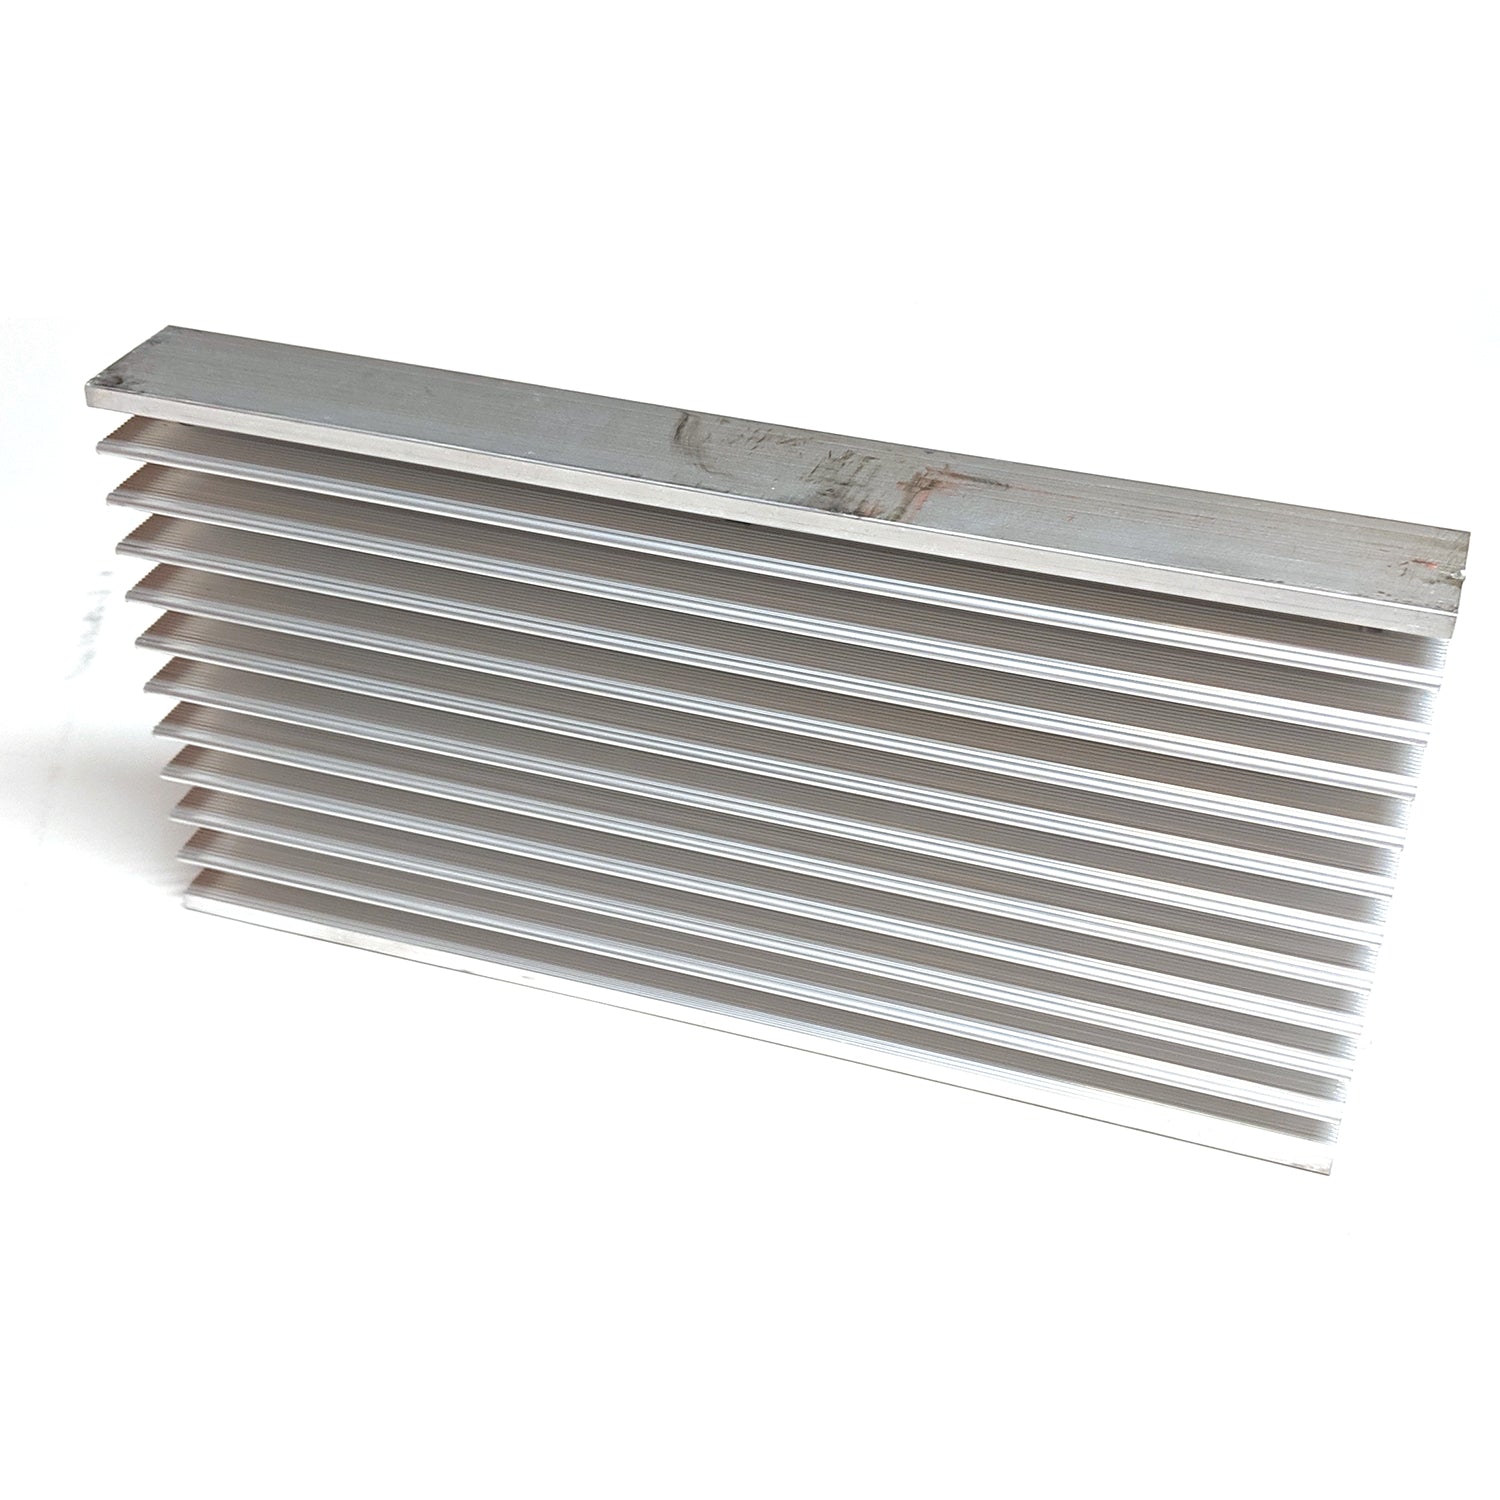 Tapped Small Heat sink